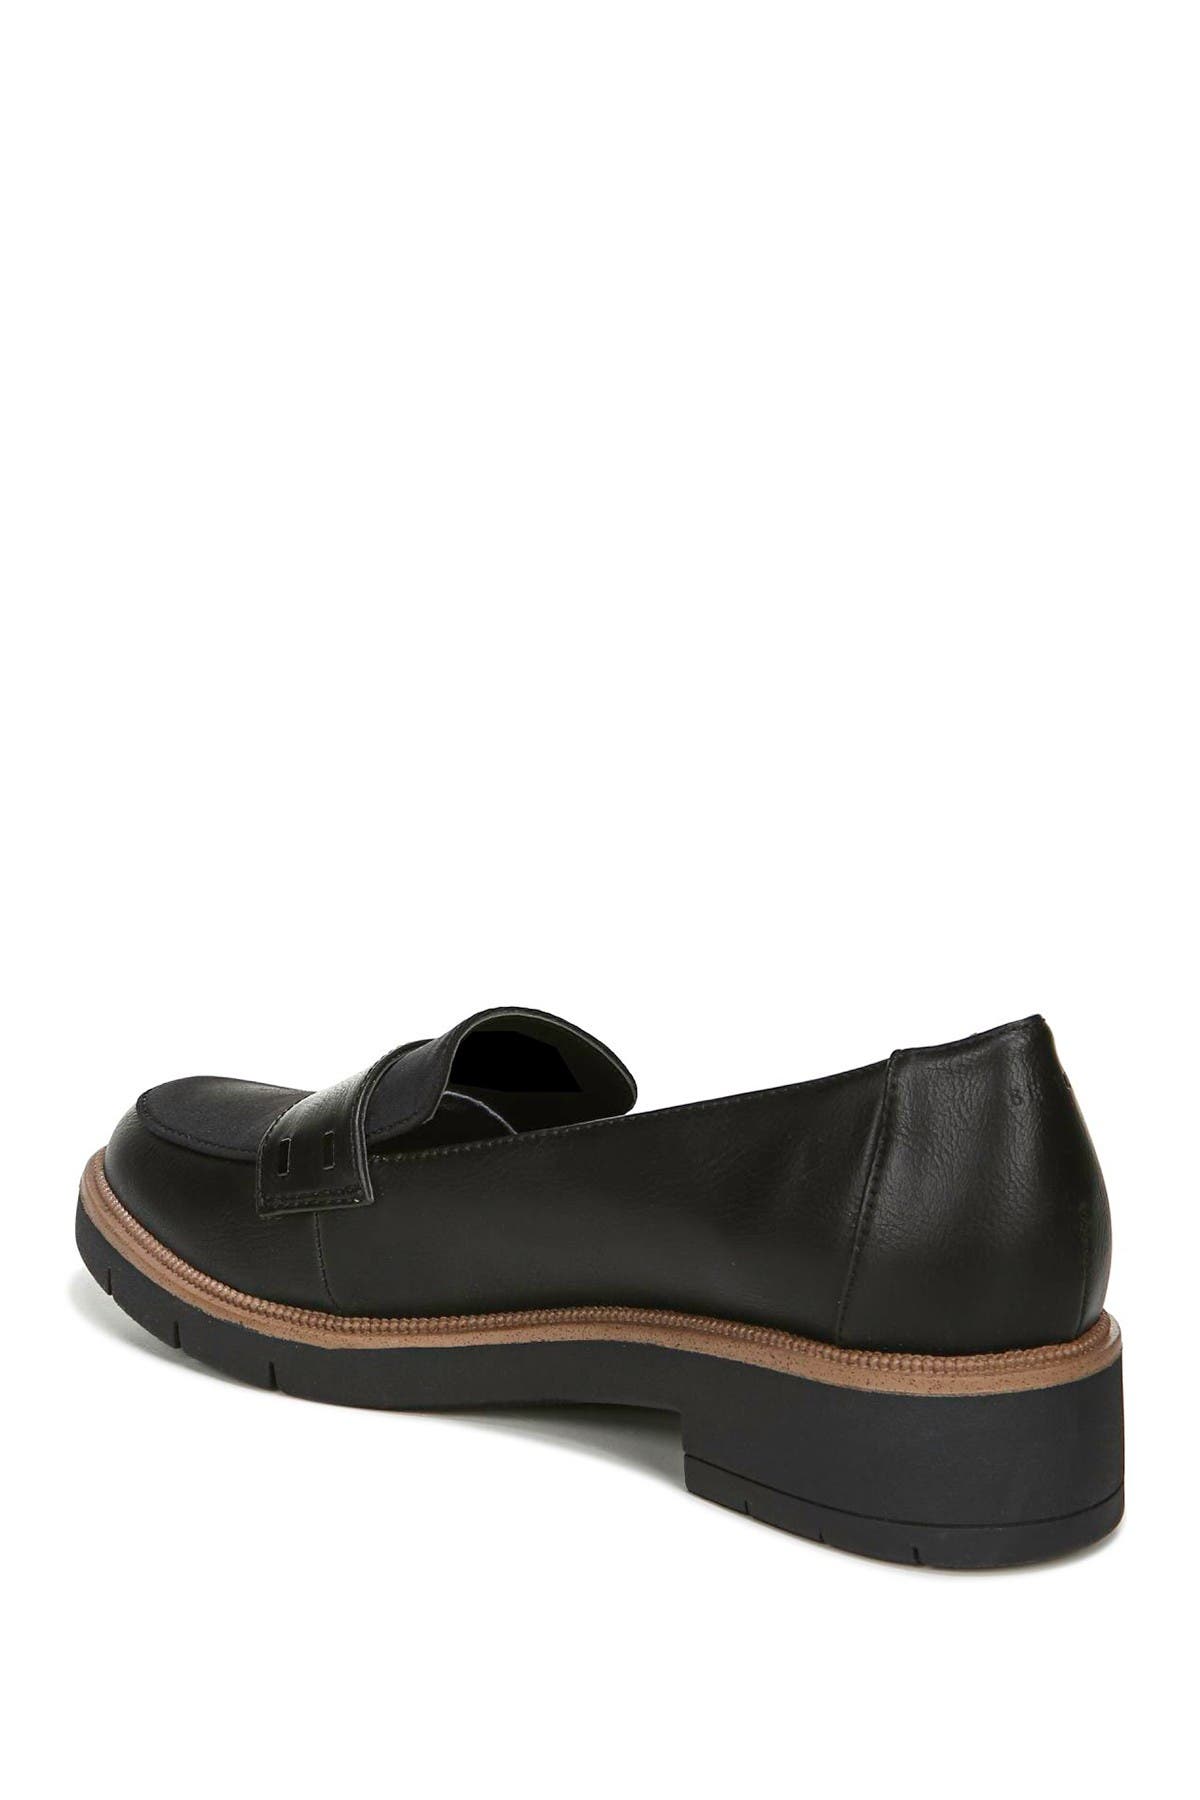 dr scholl's grow up loafer